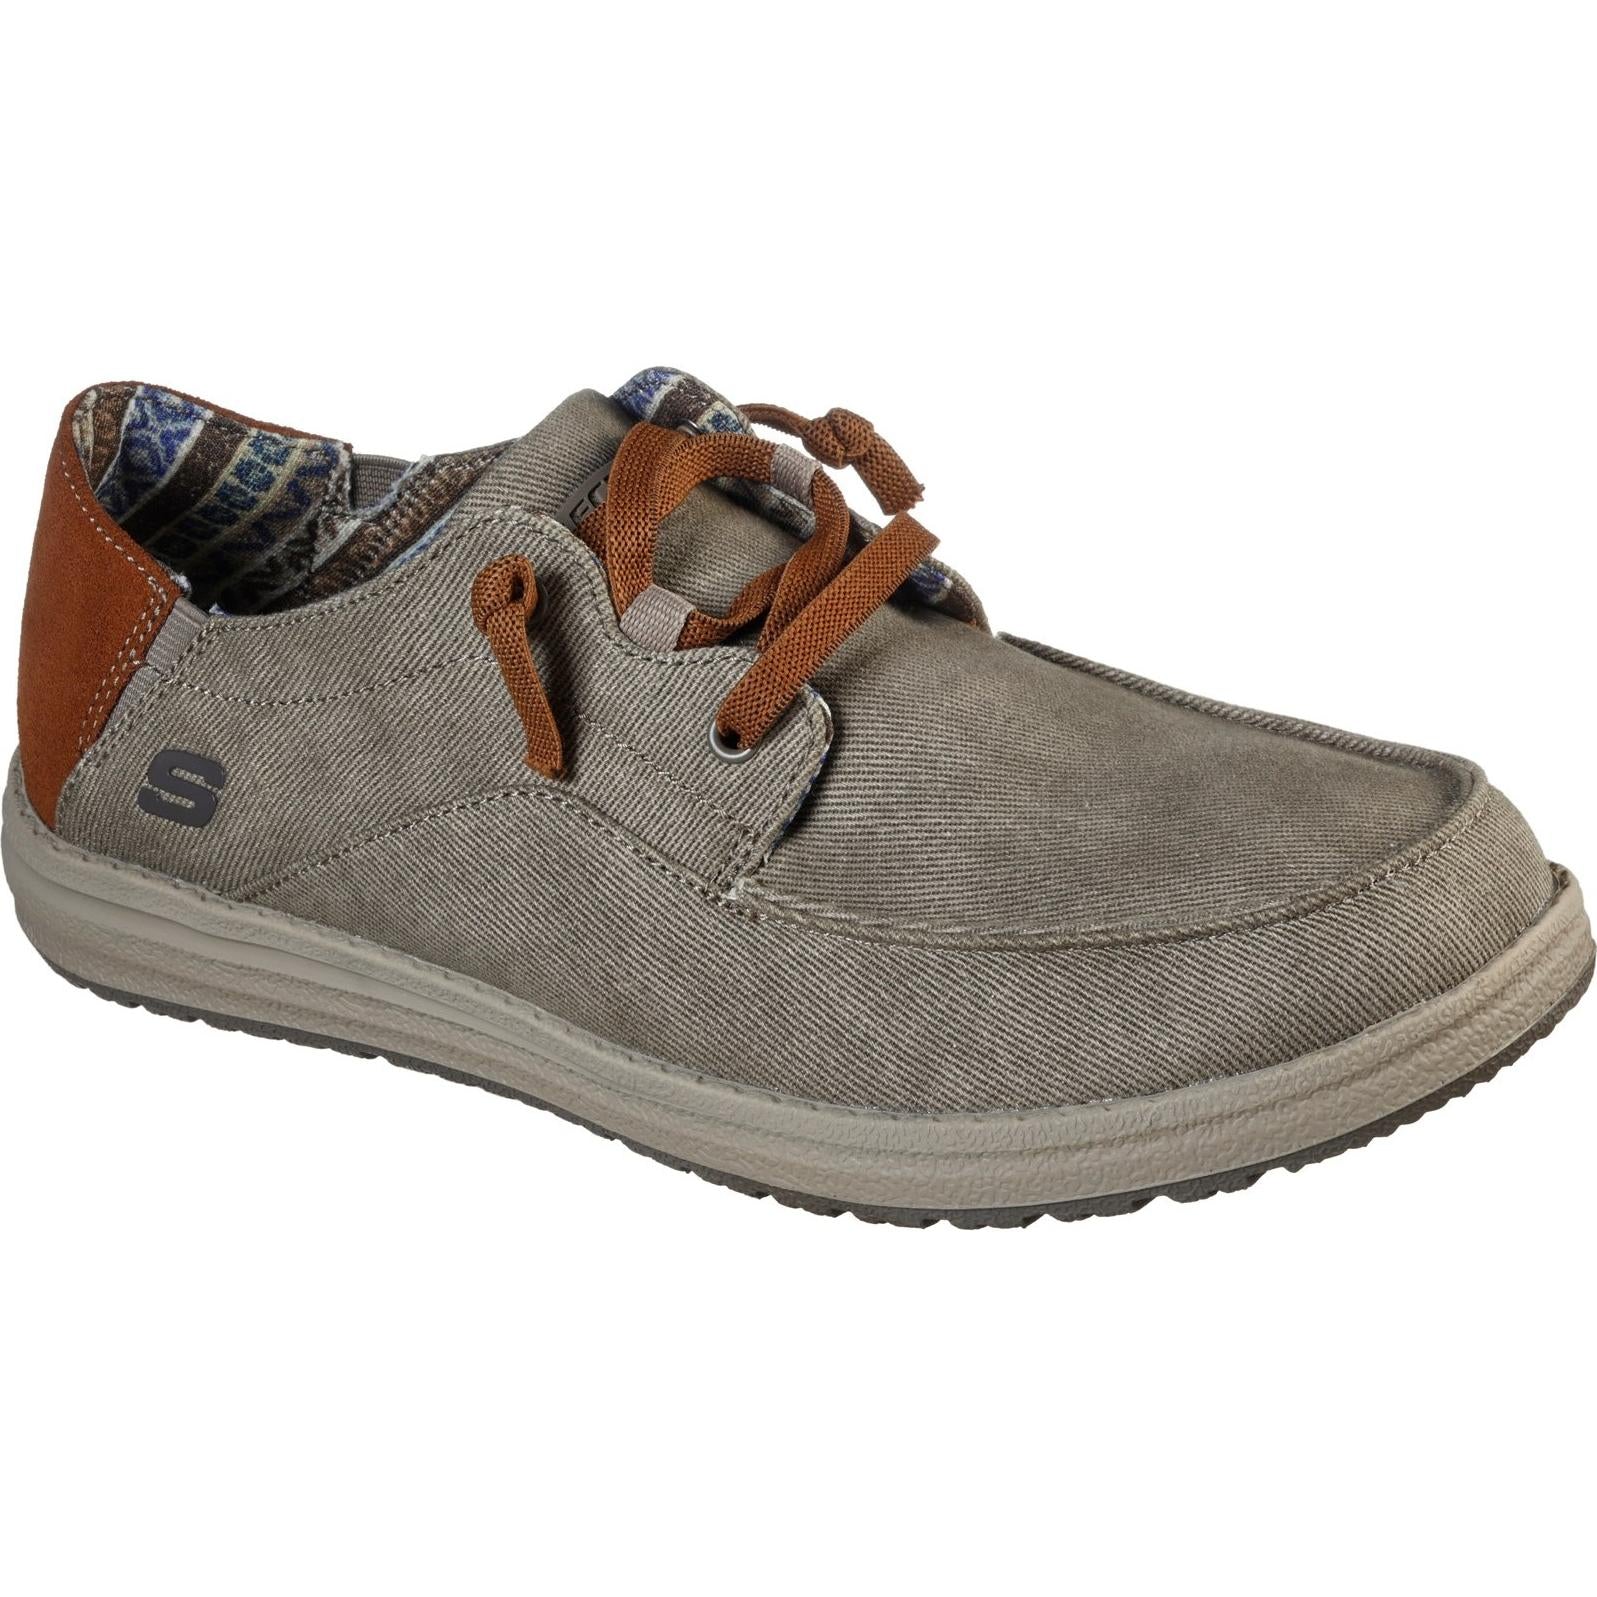 Skechers Melson Planon Shoes